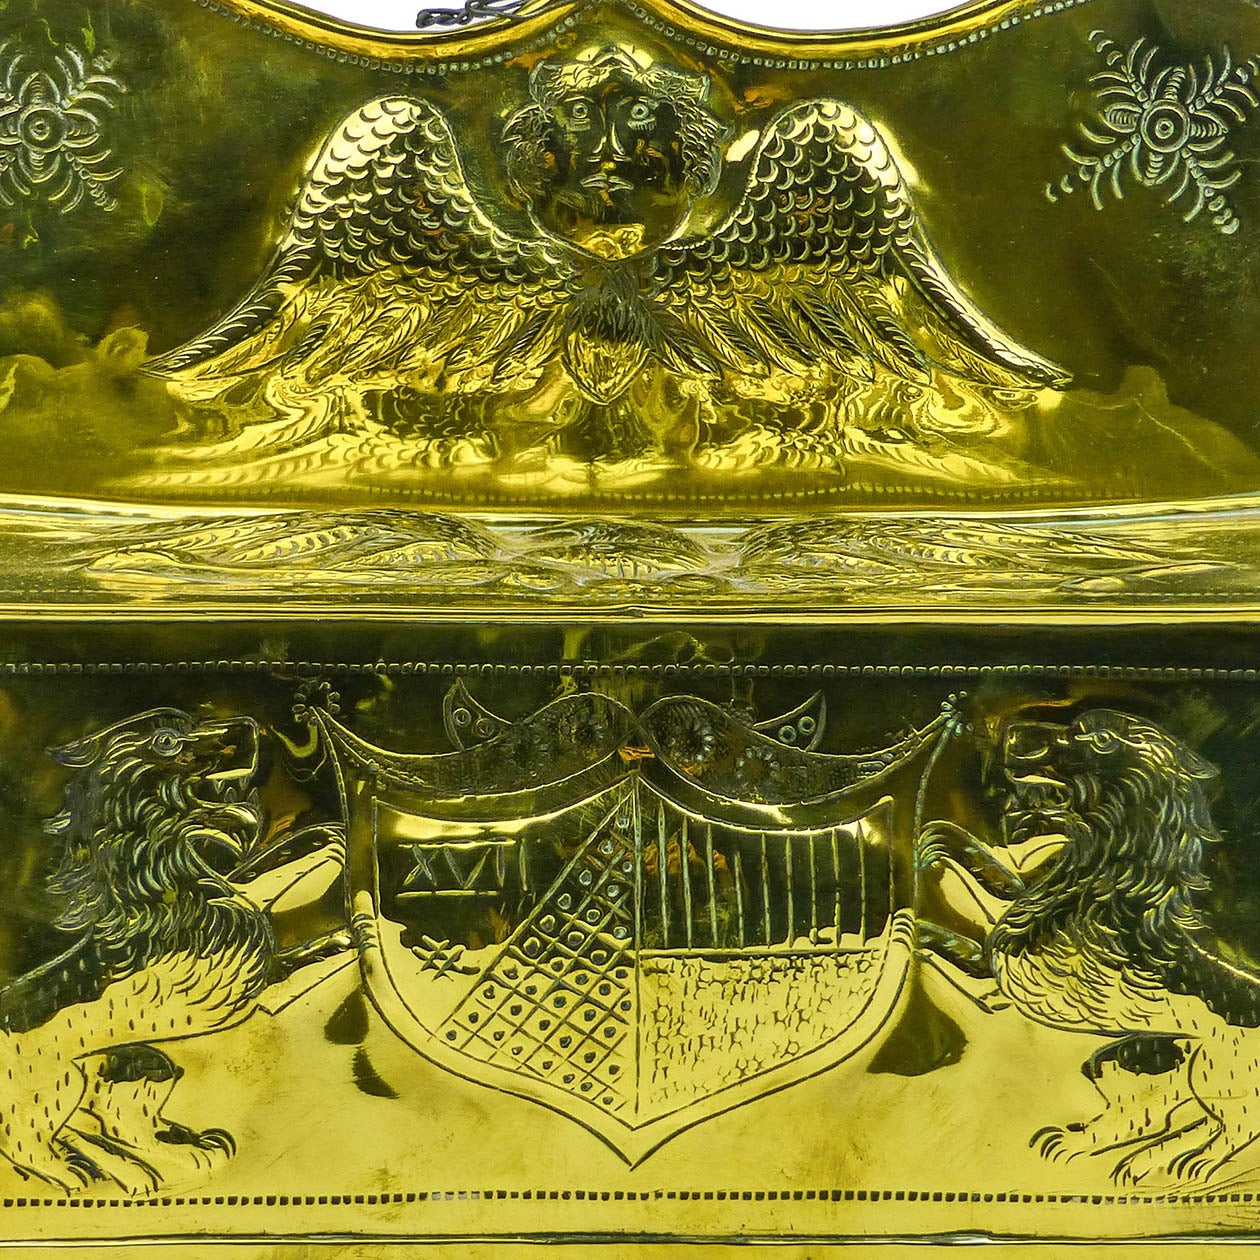 English / Dutch Brass Candle Box Circa 1875.

Decorated and beautiful condition.

Length 10 1/2″, Depth 4 1/2″, Height 7 3/4″.